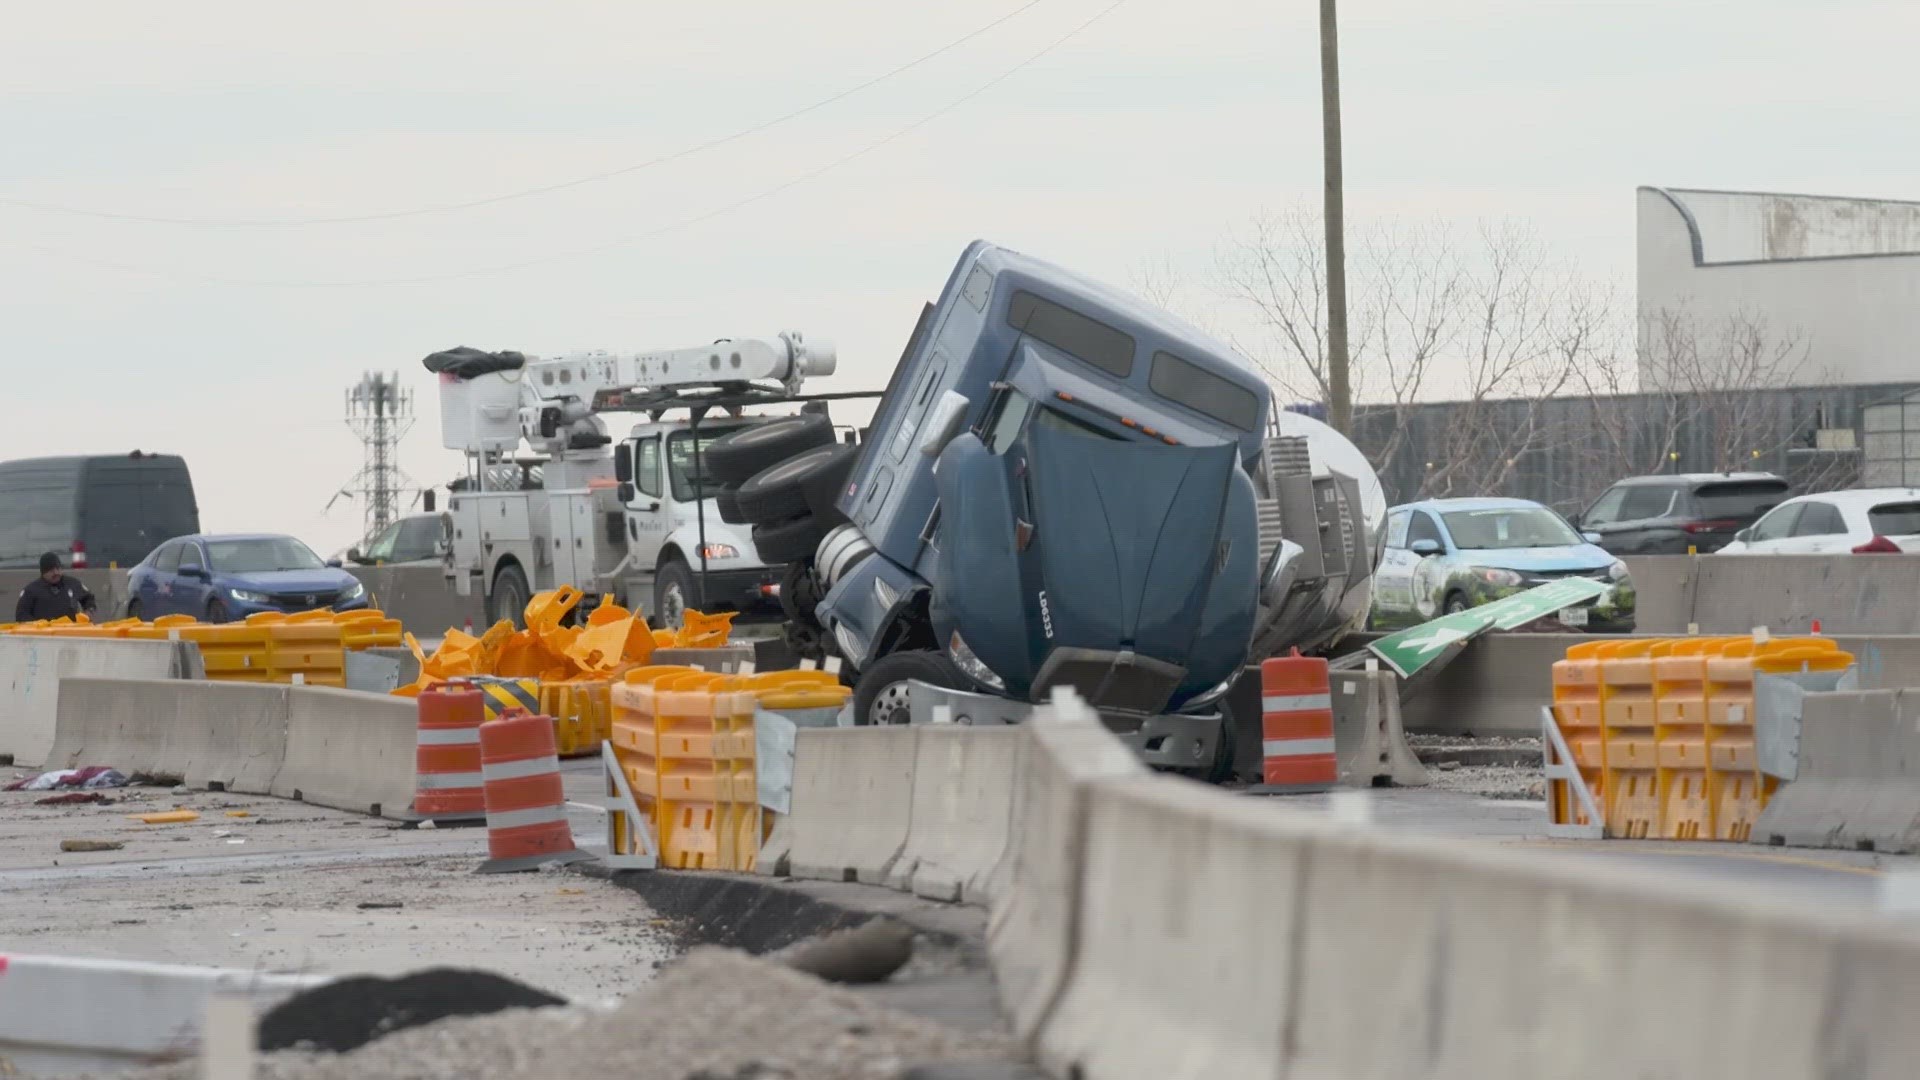 An 18-wheeler crashed into a concrete wall along I-635 in Garland on Thursday morning, blocking lanes of traffic and prompting a hazmat response.